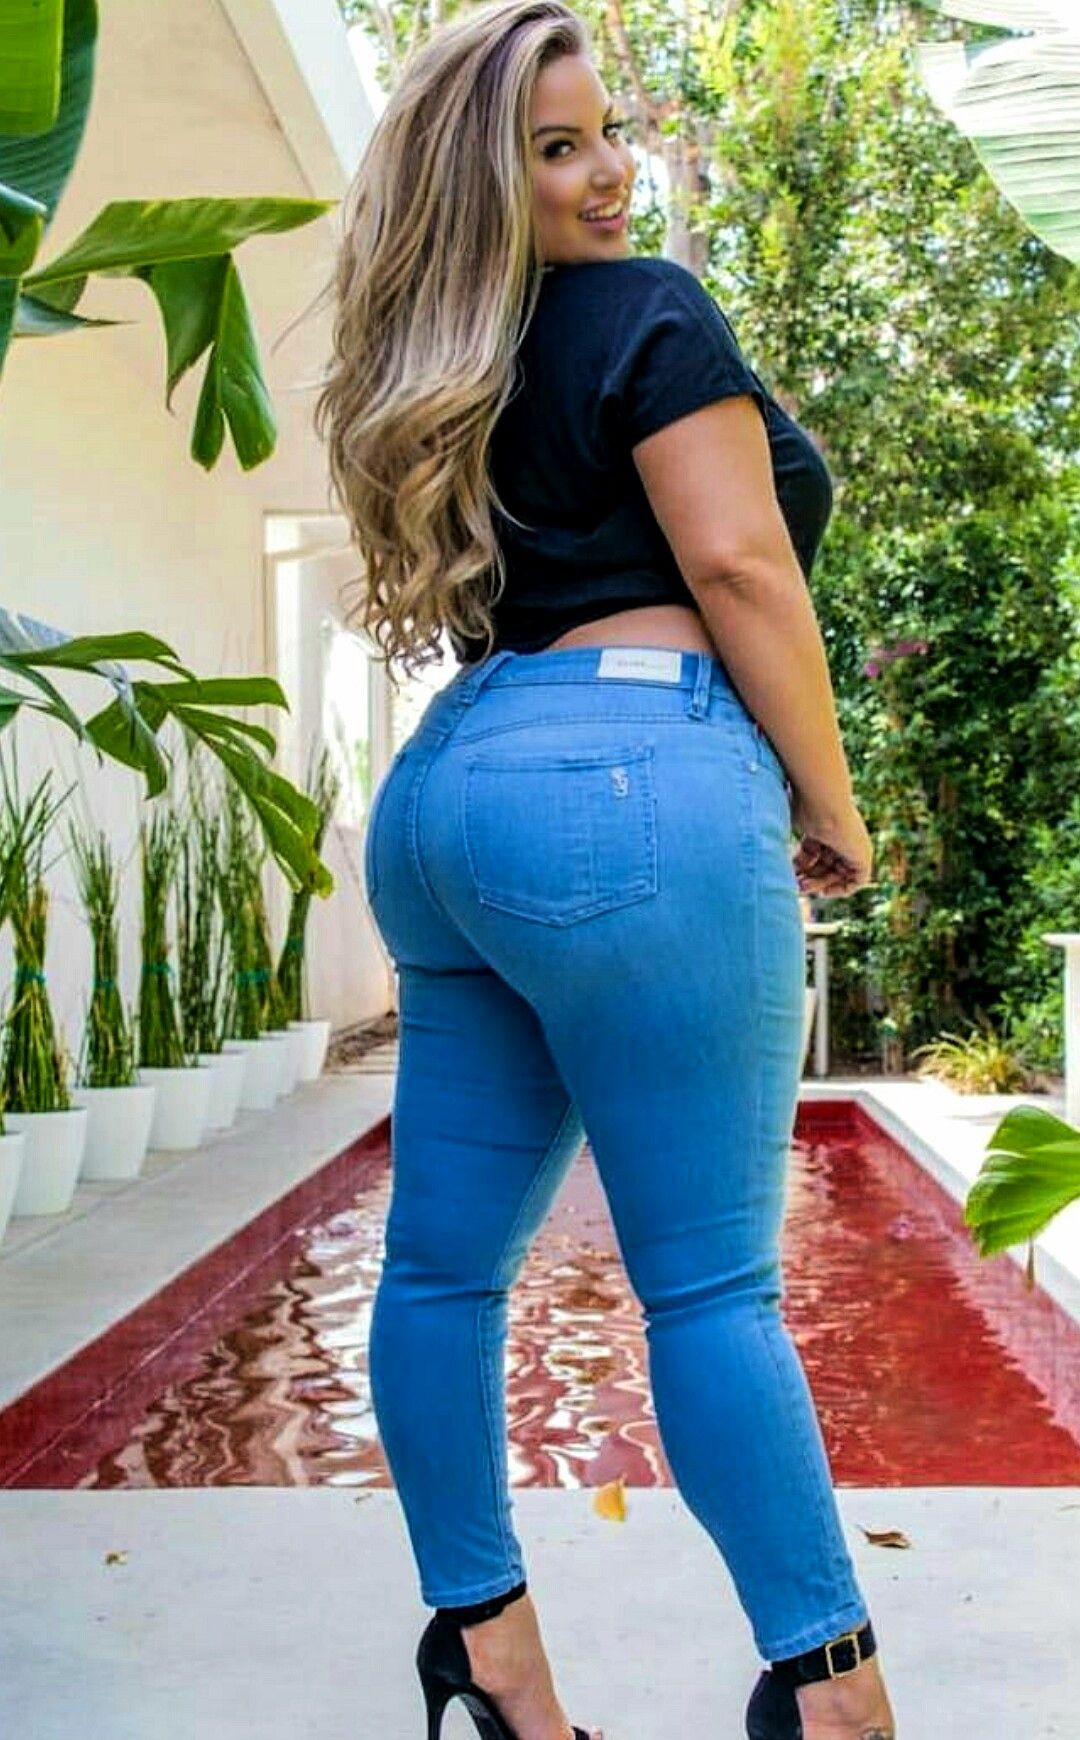 Lovely ideas! ashley alexiss jeans: Denim skirt,  Slim-Fit Pants,  Plus-Size Model,  Ashley Alexiss,  Jeans Outfit,  Tight Jeans Outfit  